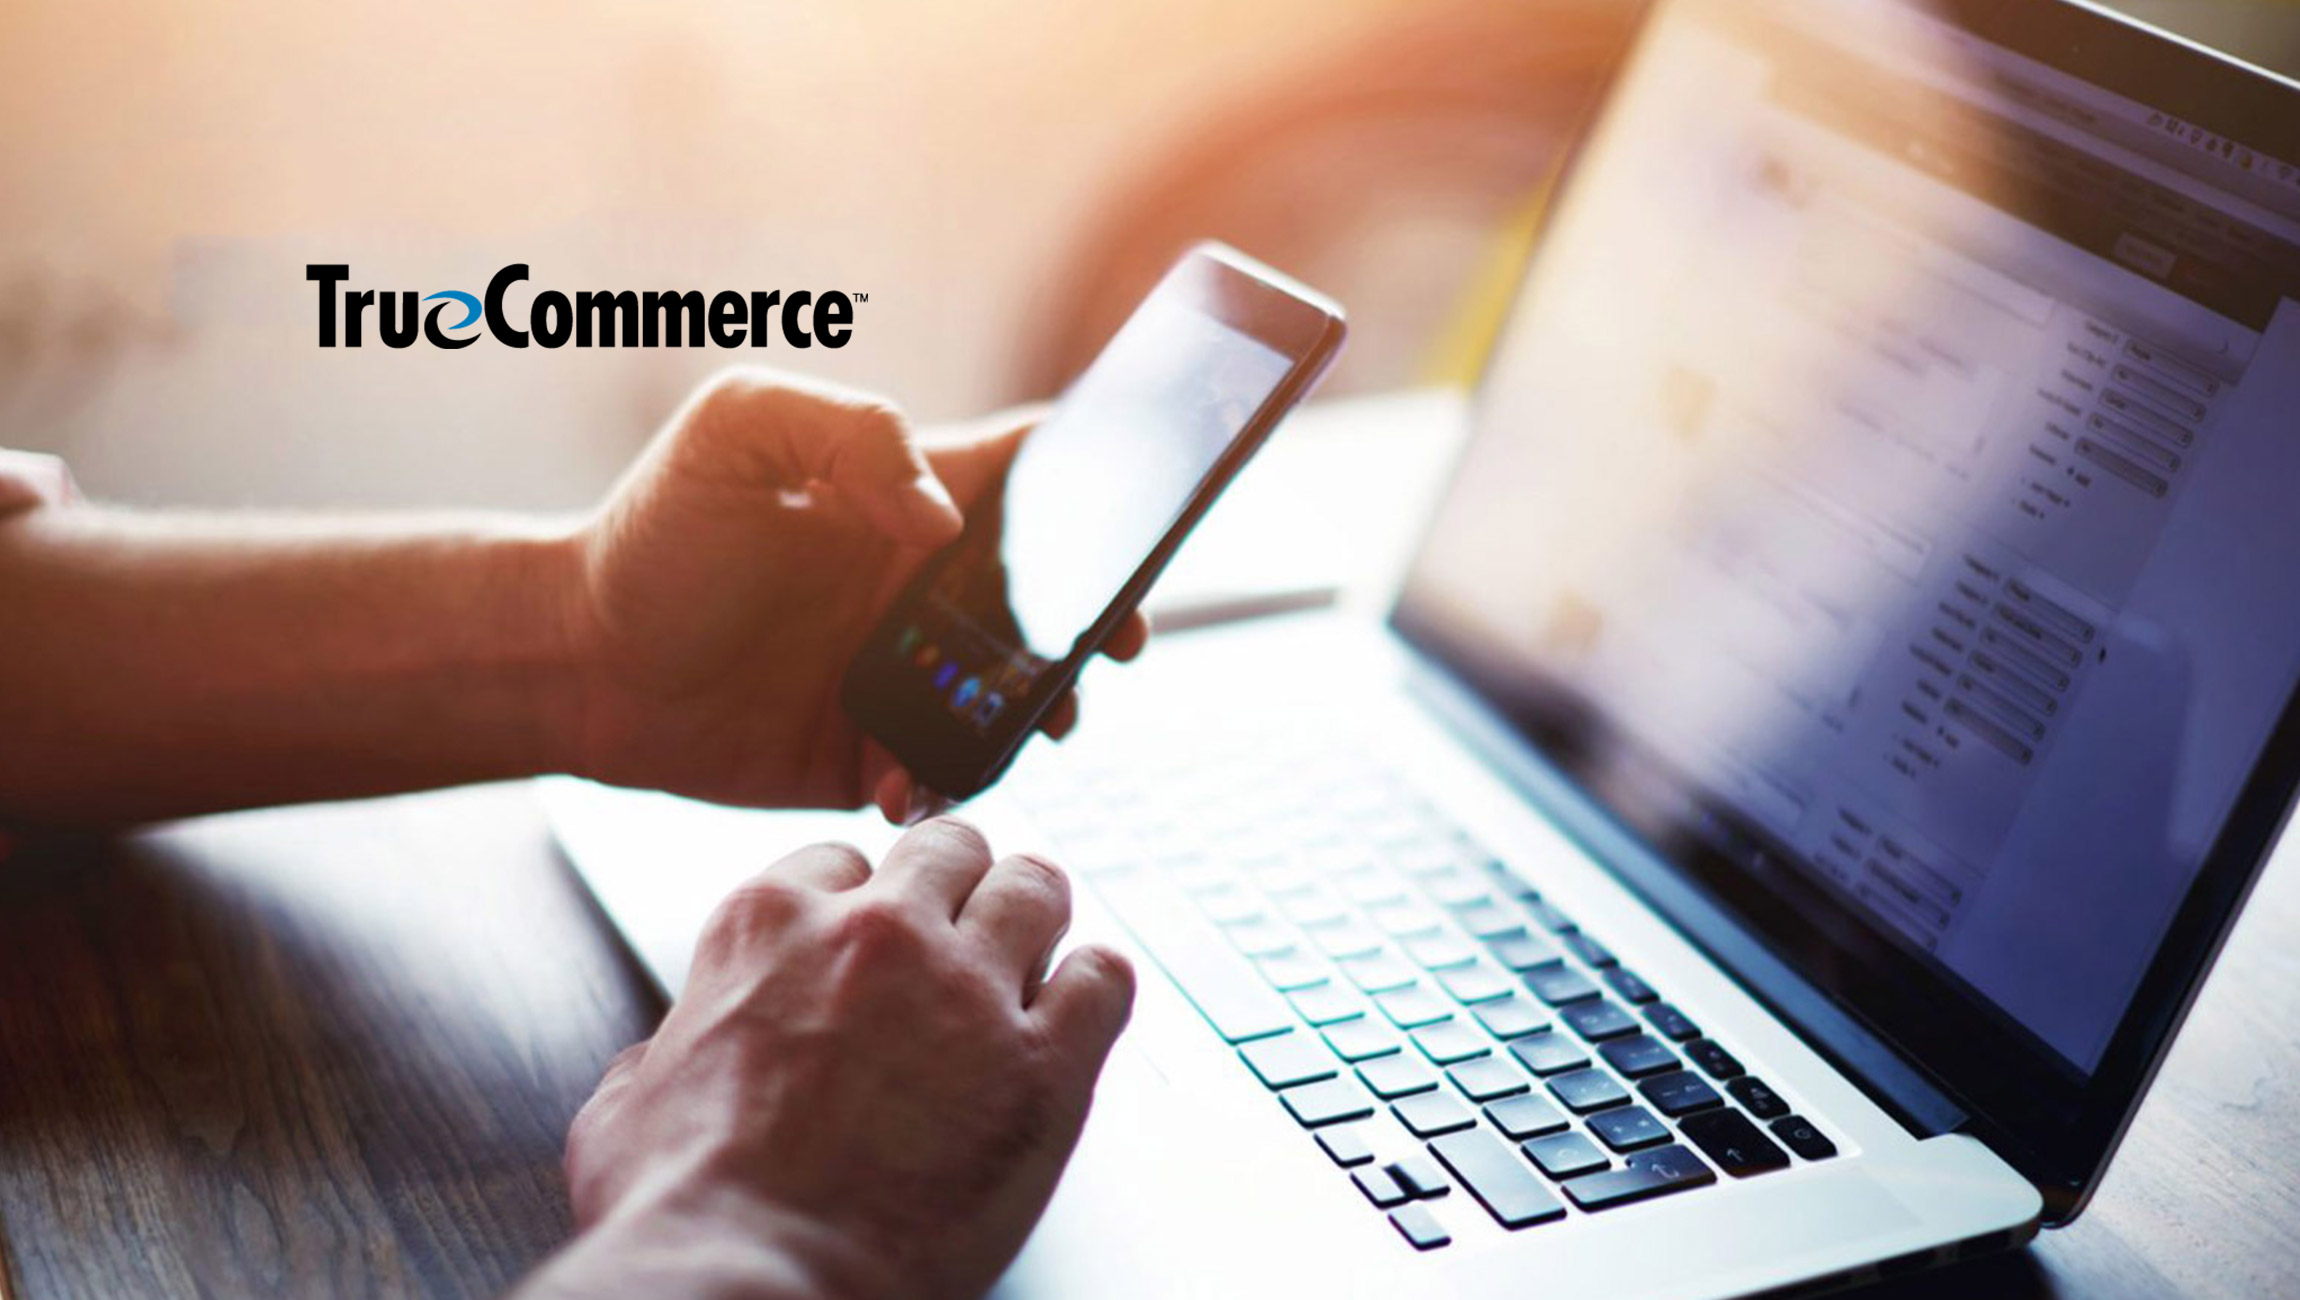 TrueCommerce Launches Seamless Integration with Mirakl Platform for Suppliers and Retailers Worldwide